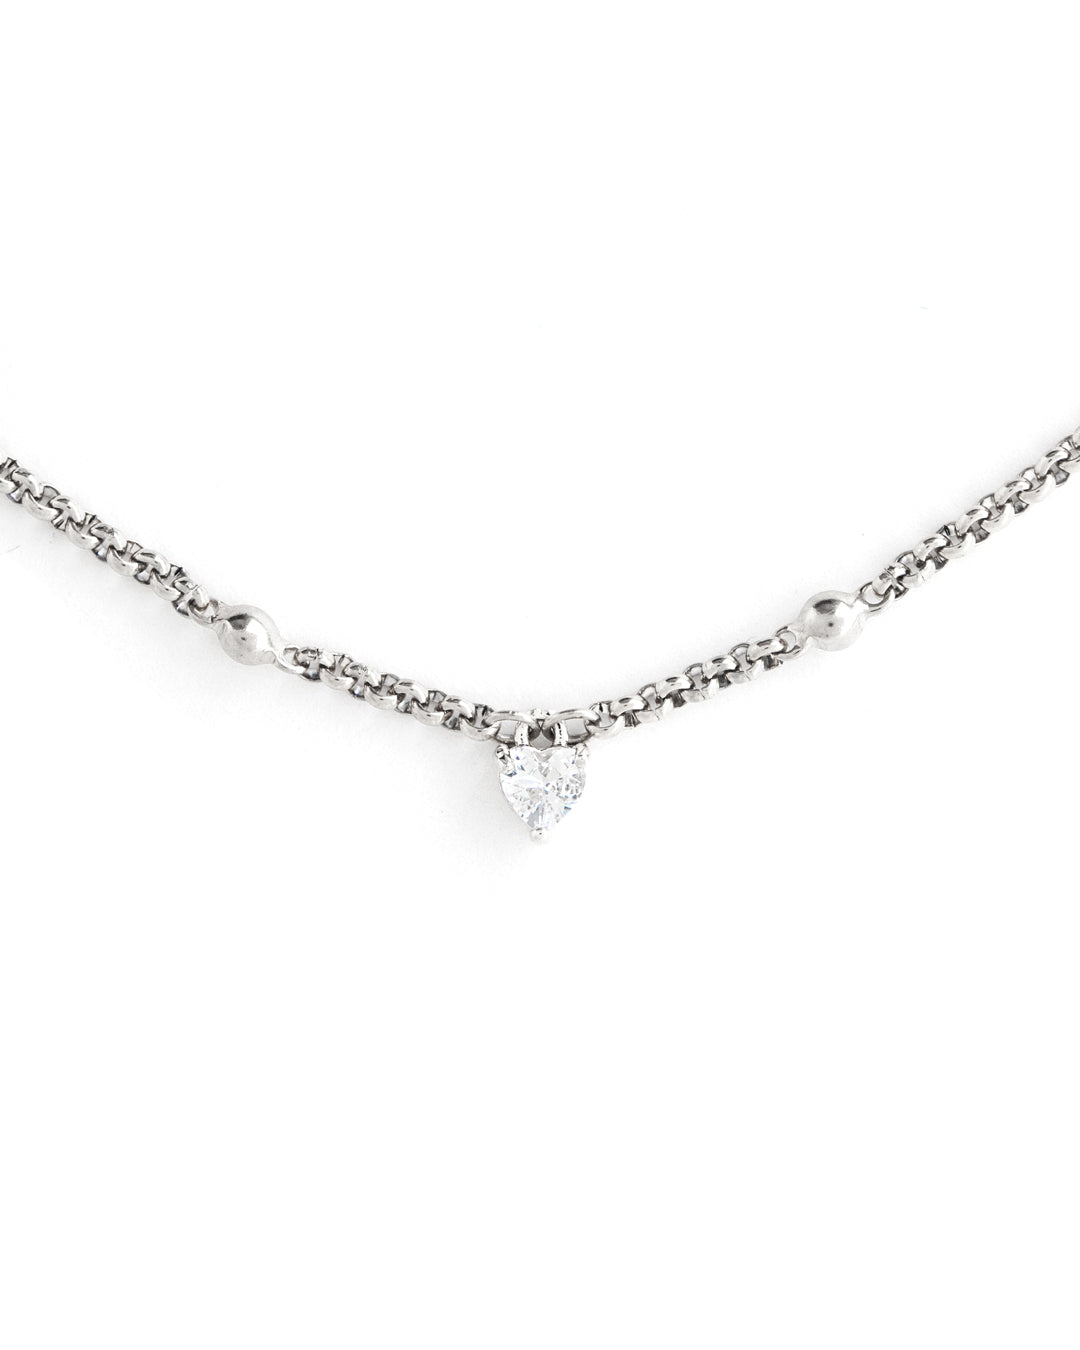 Luvo collier argent